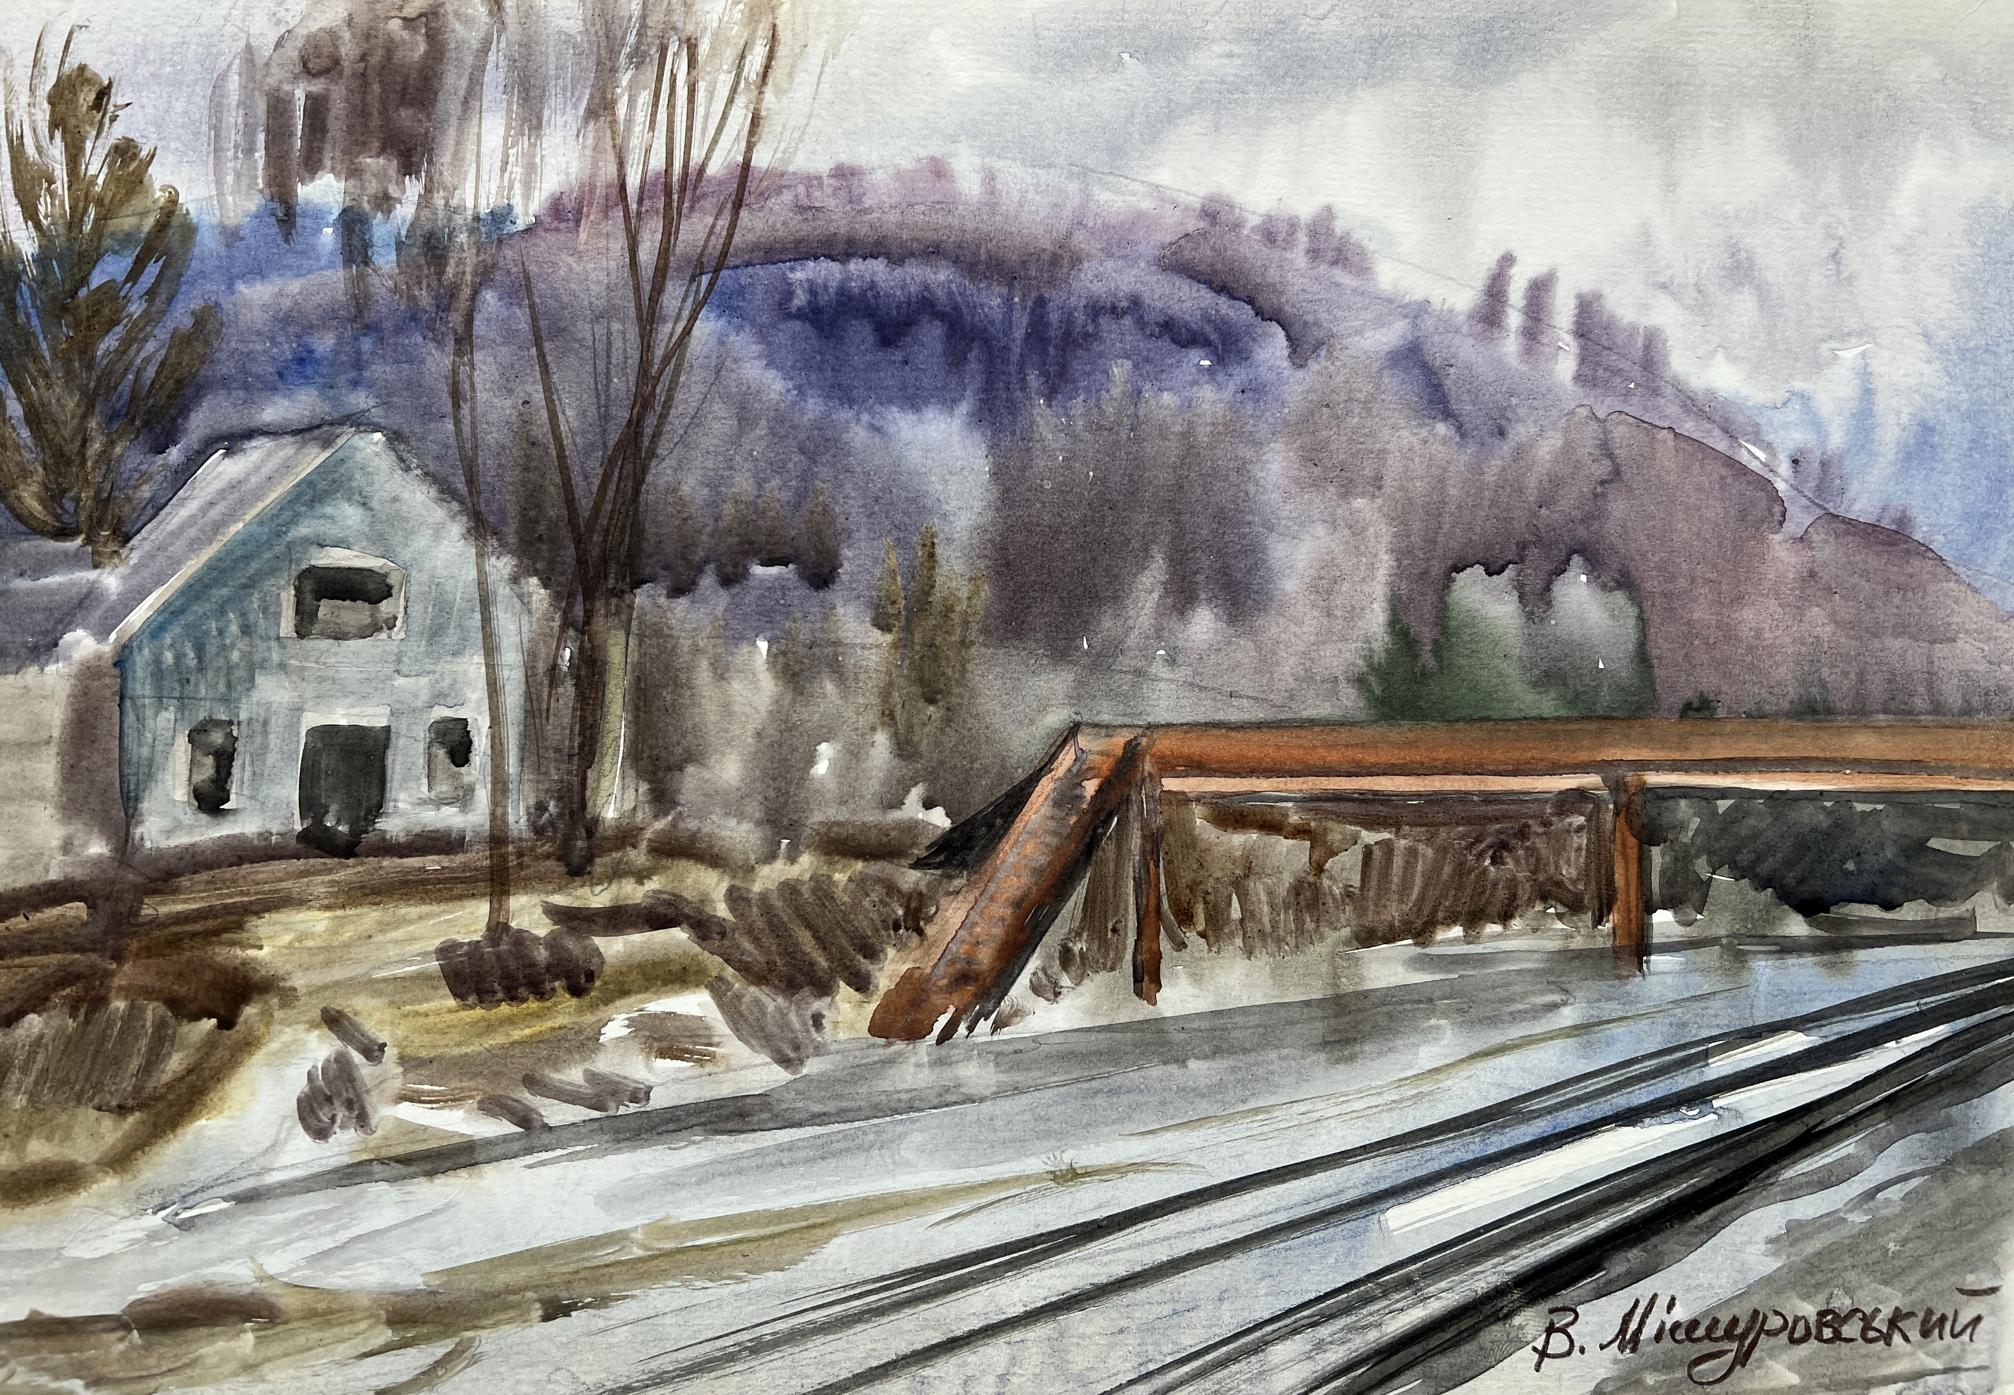 Watercolor painting Railway in the city V. Mishurovsky